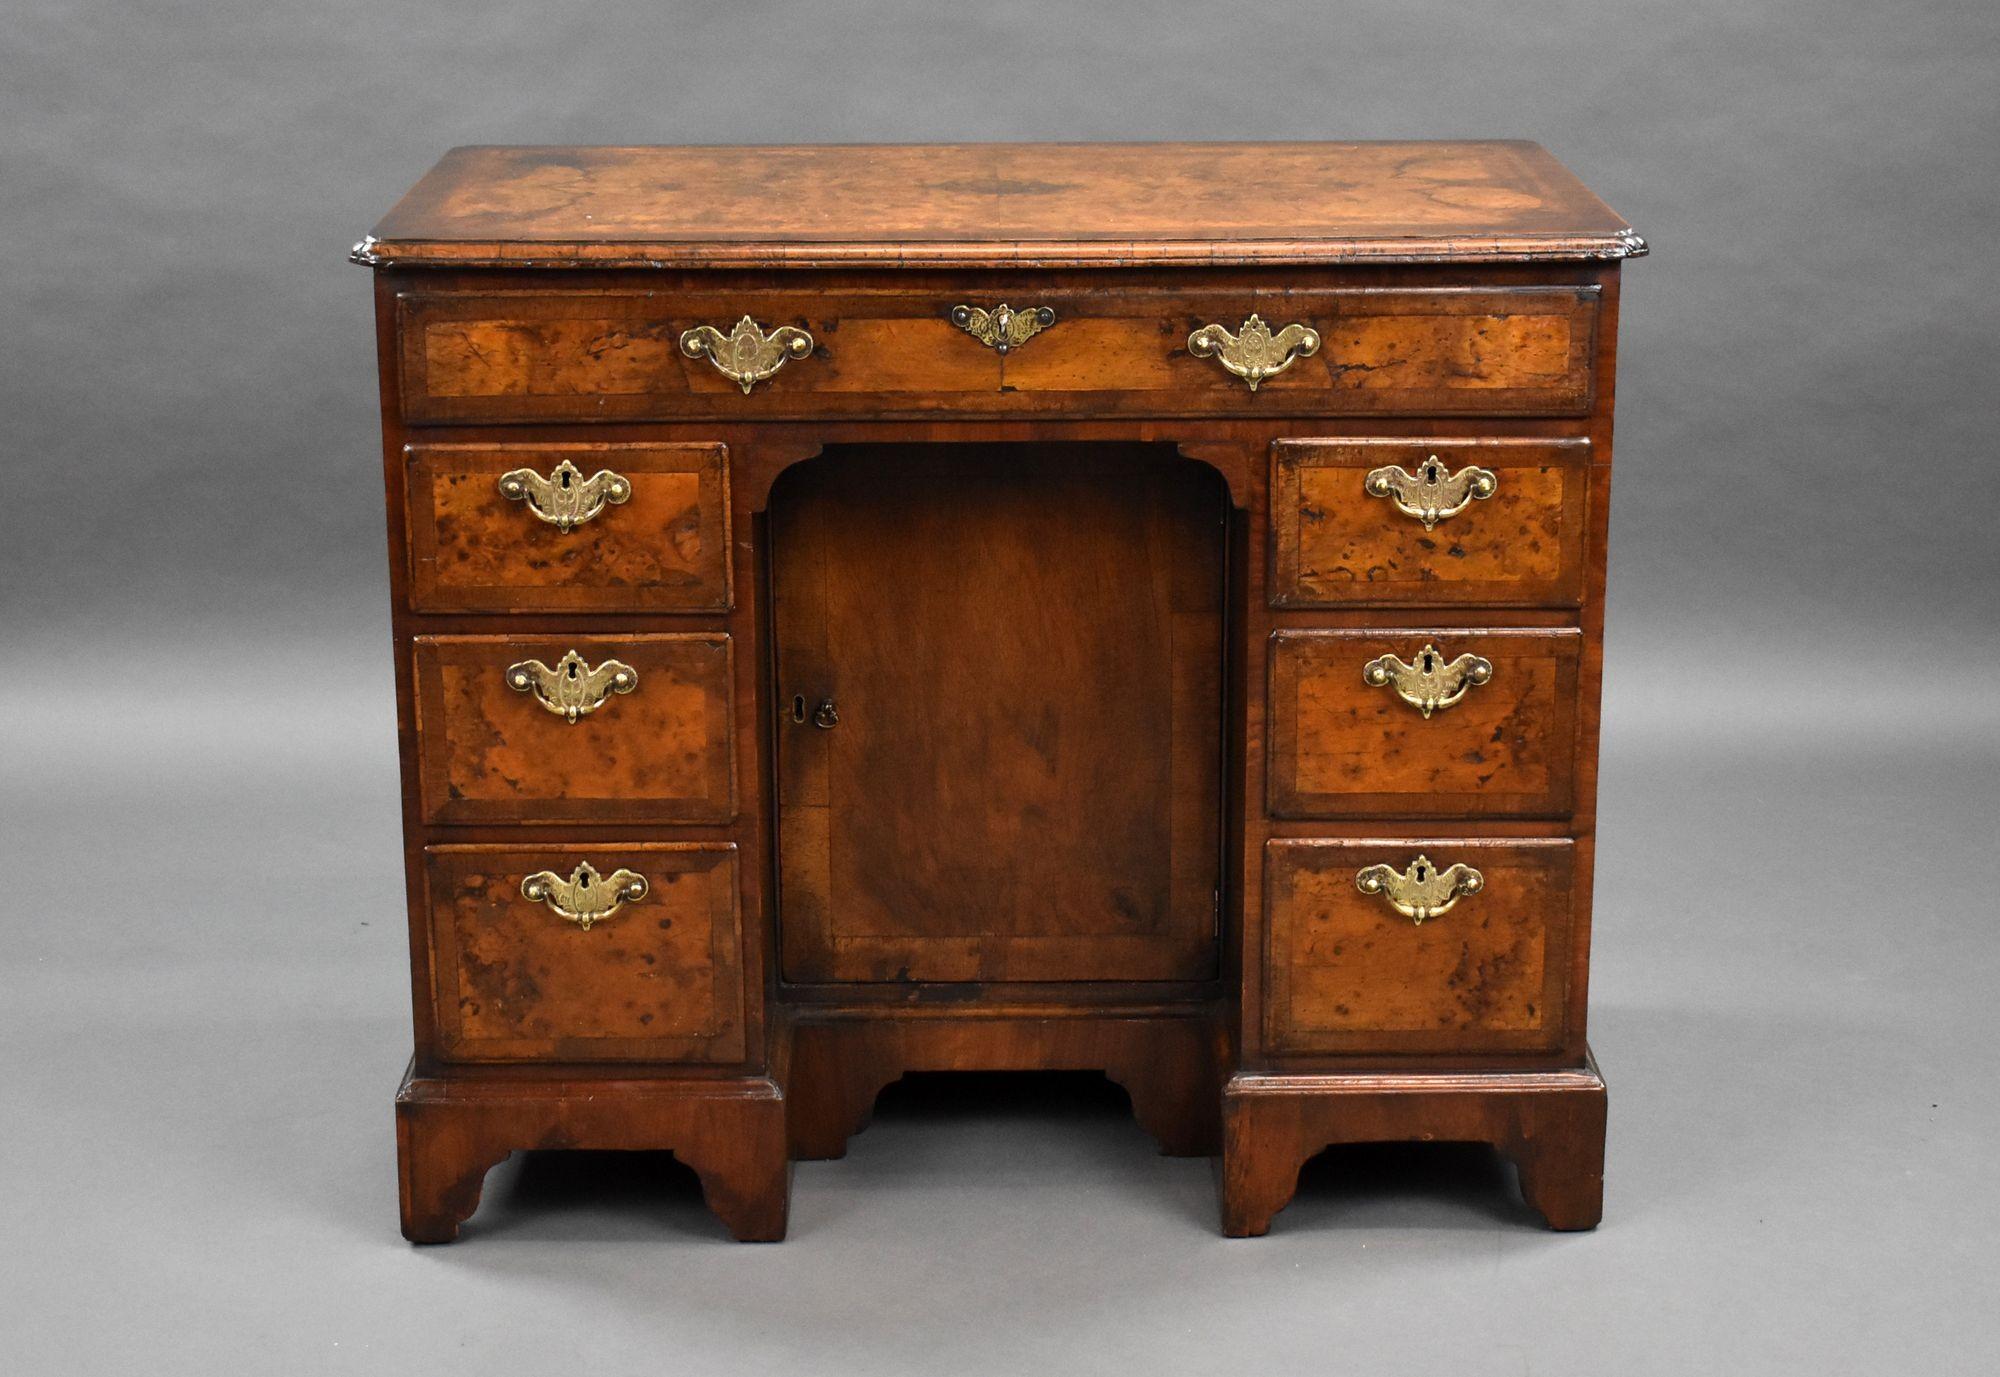 For sale is a good quality antique burr walnut kneehole desk, having a cross banded and quarter veneered top, with cross grain mouldings to the edge, above an arrangement of seven drawers with a cupboard to the centre, each having original brass